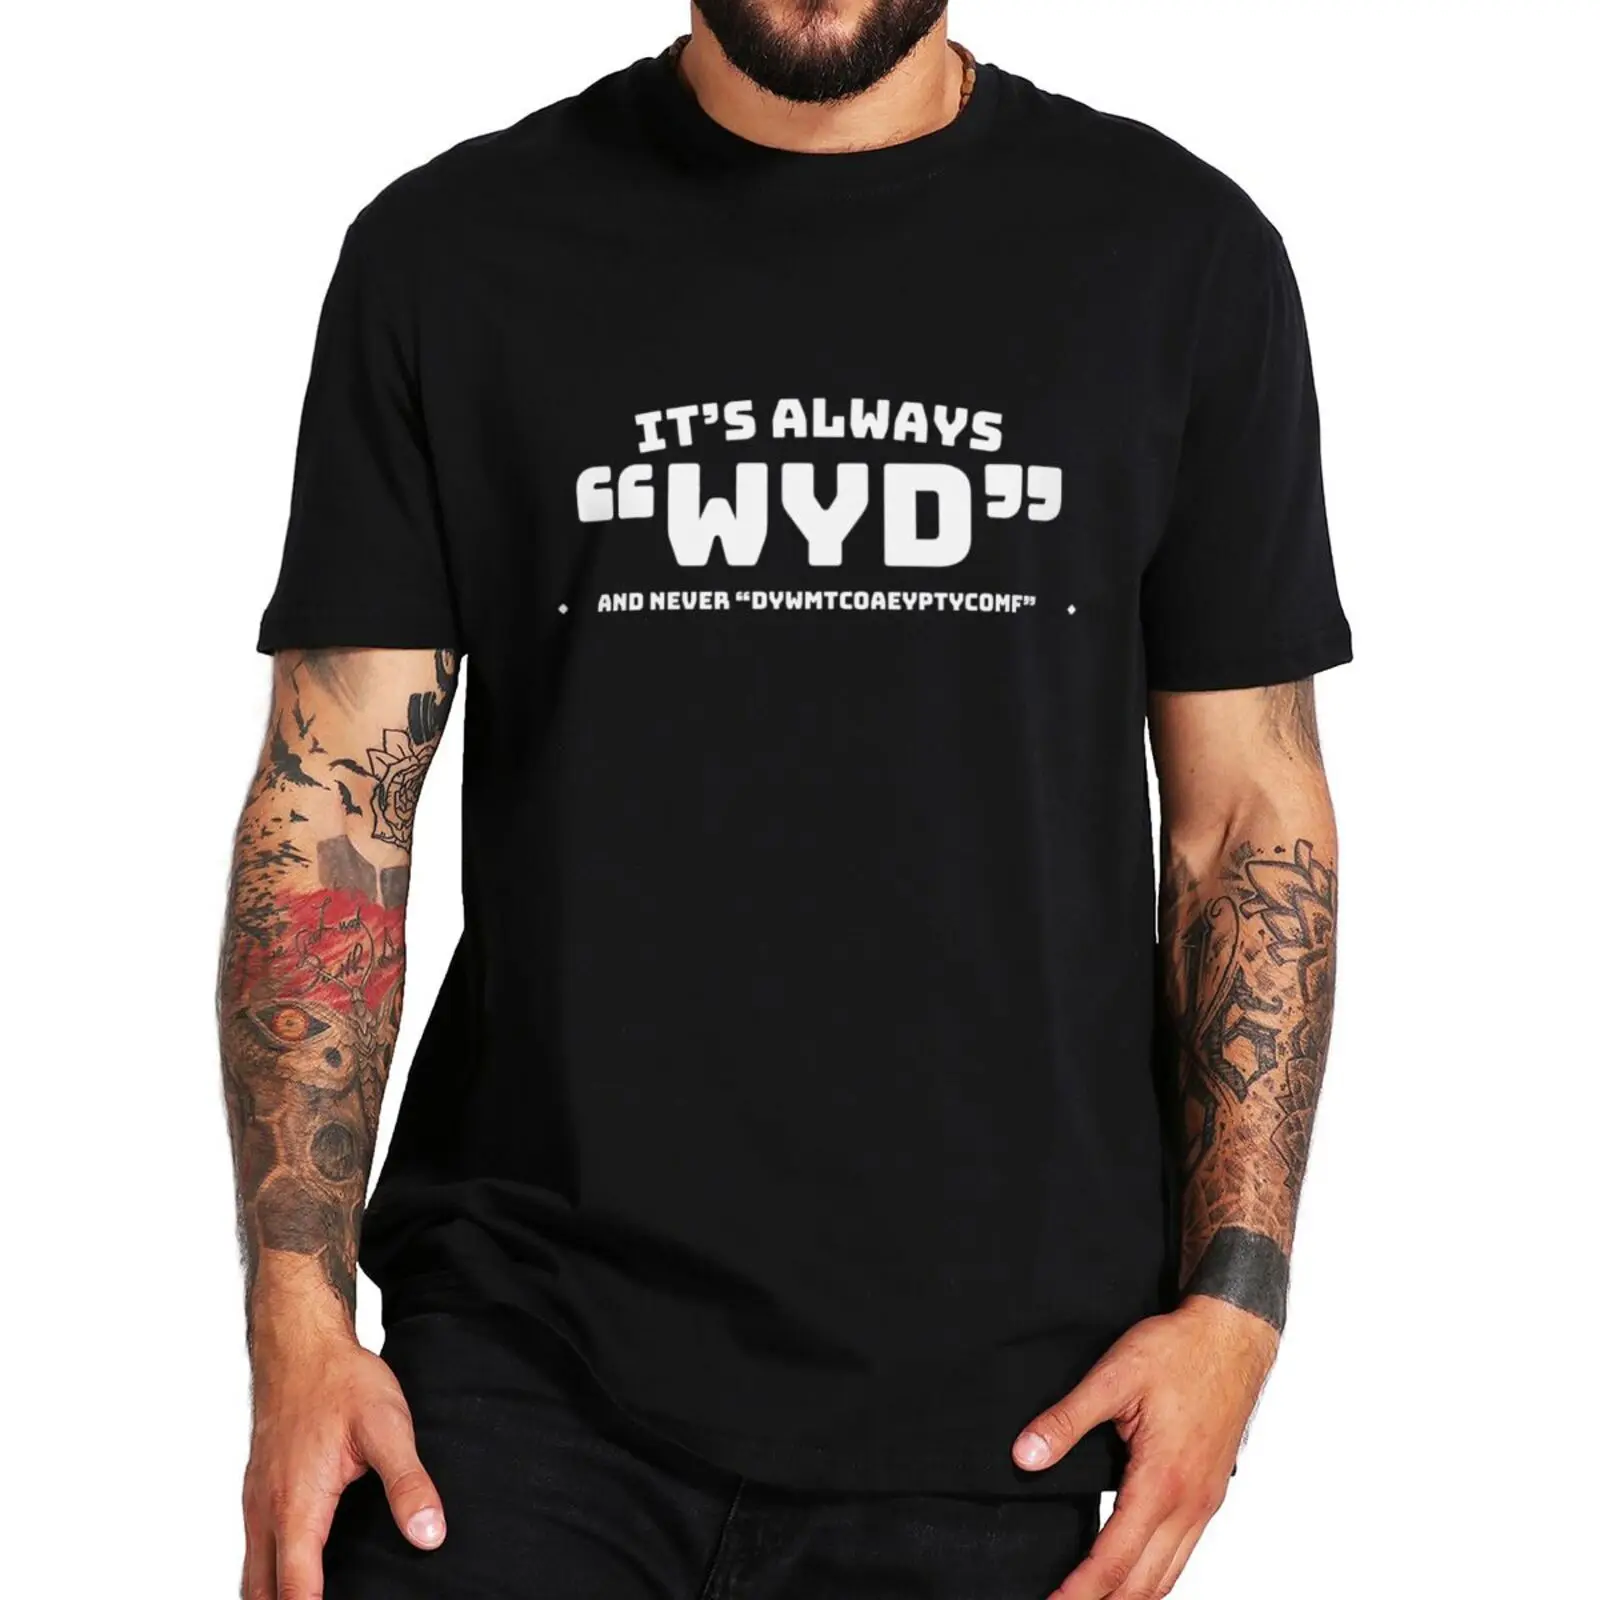 

It's Always Wyd And Never Dywmtcoaeyptycomf T Shirt Funny Adult Humor Jokes Tee Tops EU Size Cotton Soft Unisex Casual T-shirts